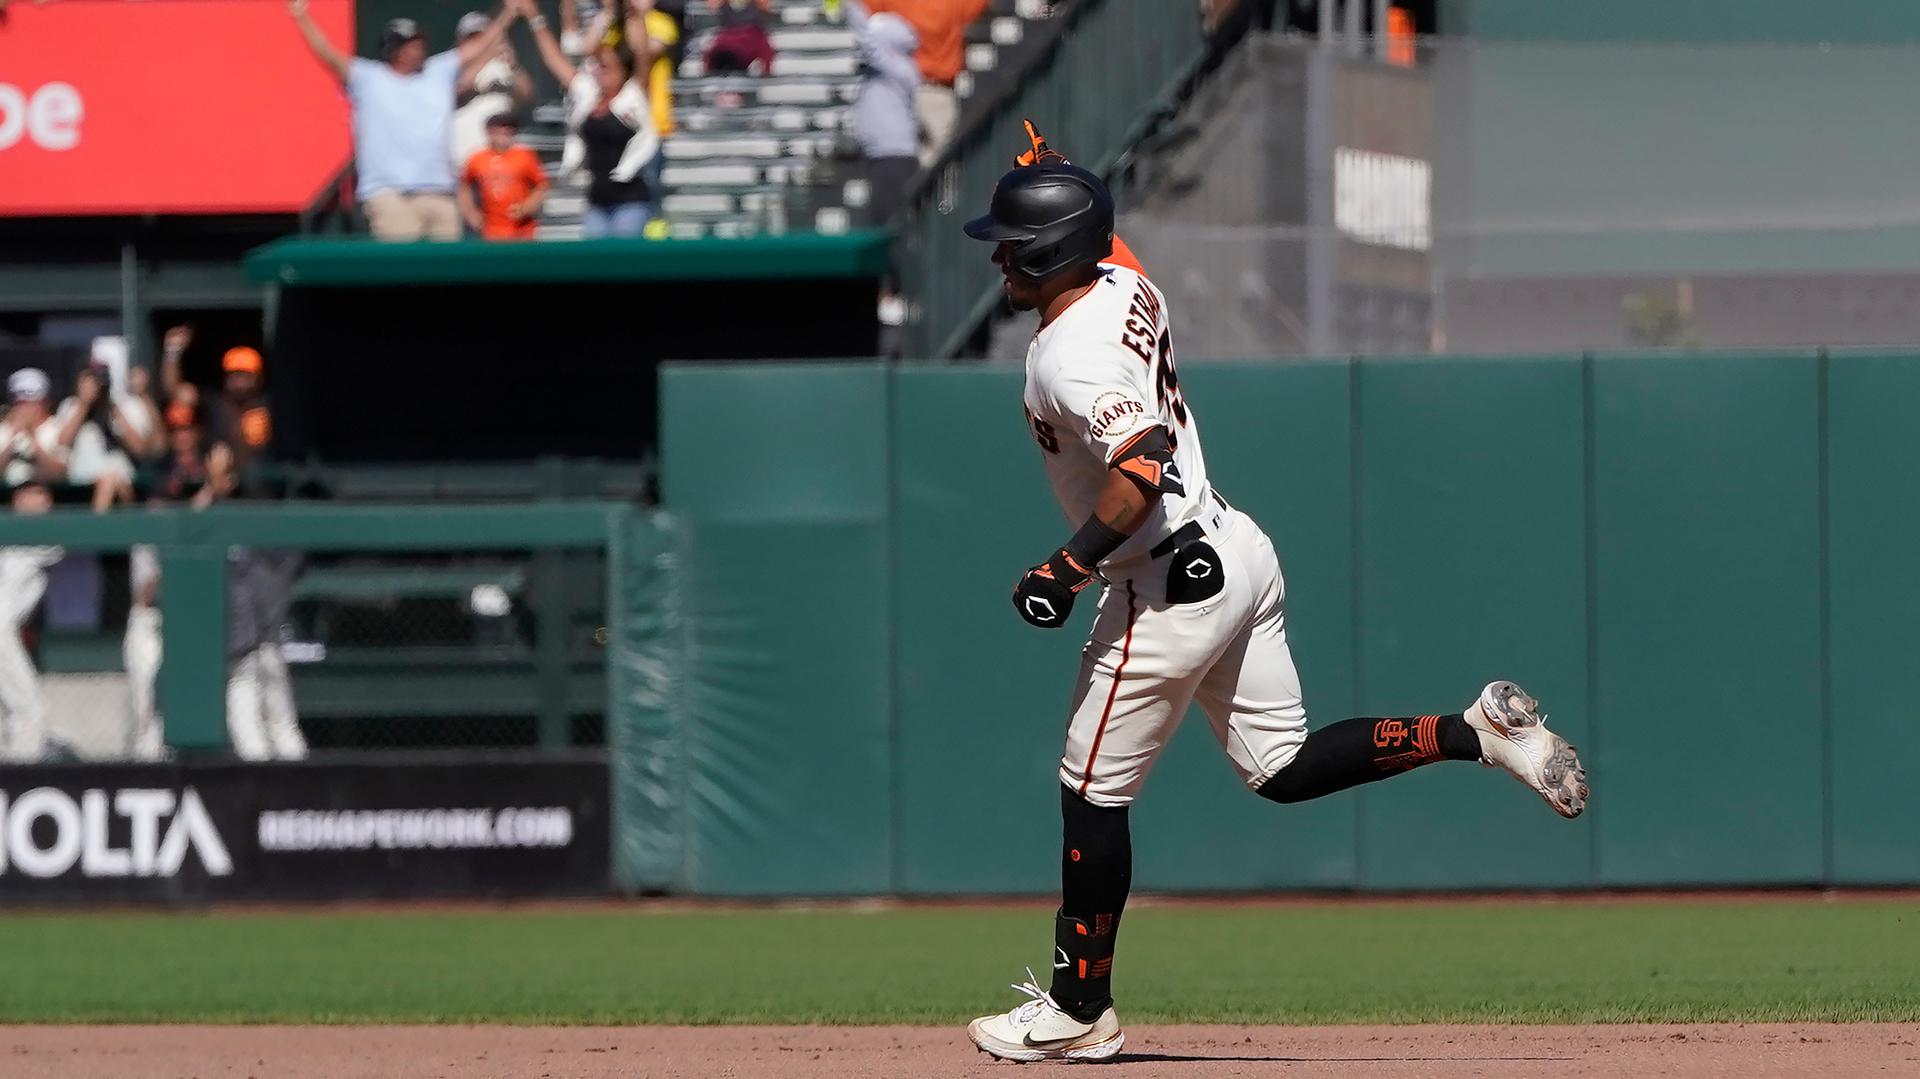 Thairo Estrada rounds the bases after his two-run walk-off home run for the Giants against the Pirates on Aug. 14, 2022.